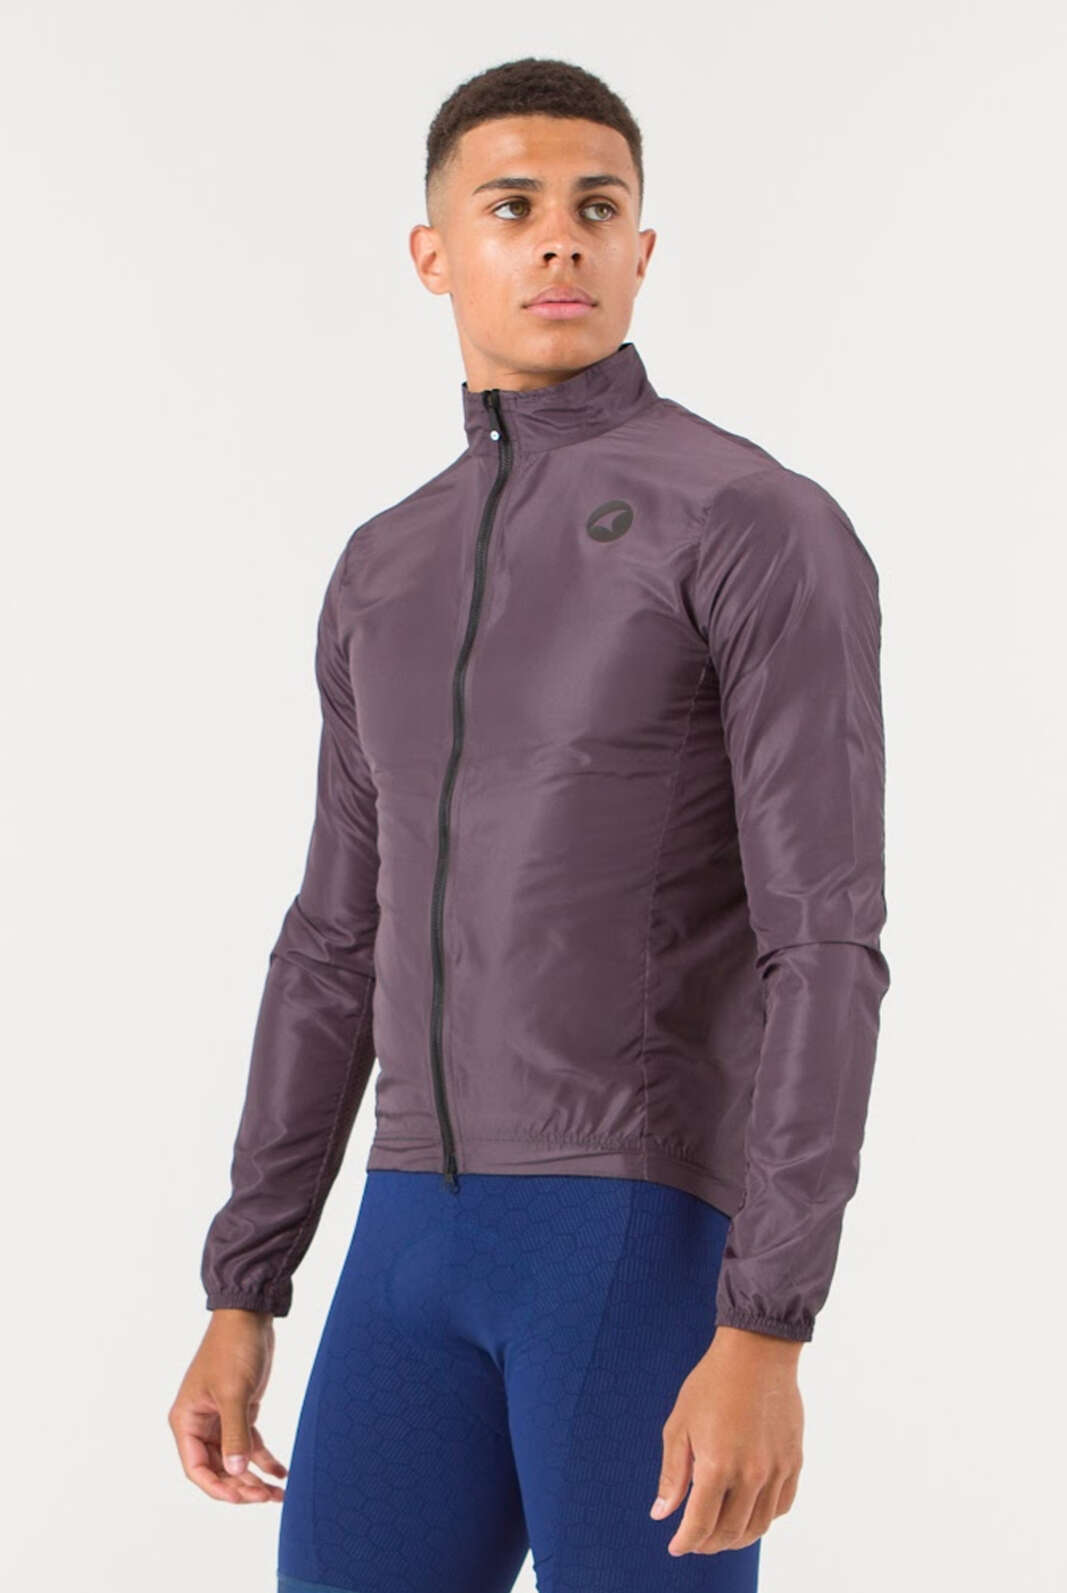 Men's Dark Gray Packable Cycling Jacket - Front View